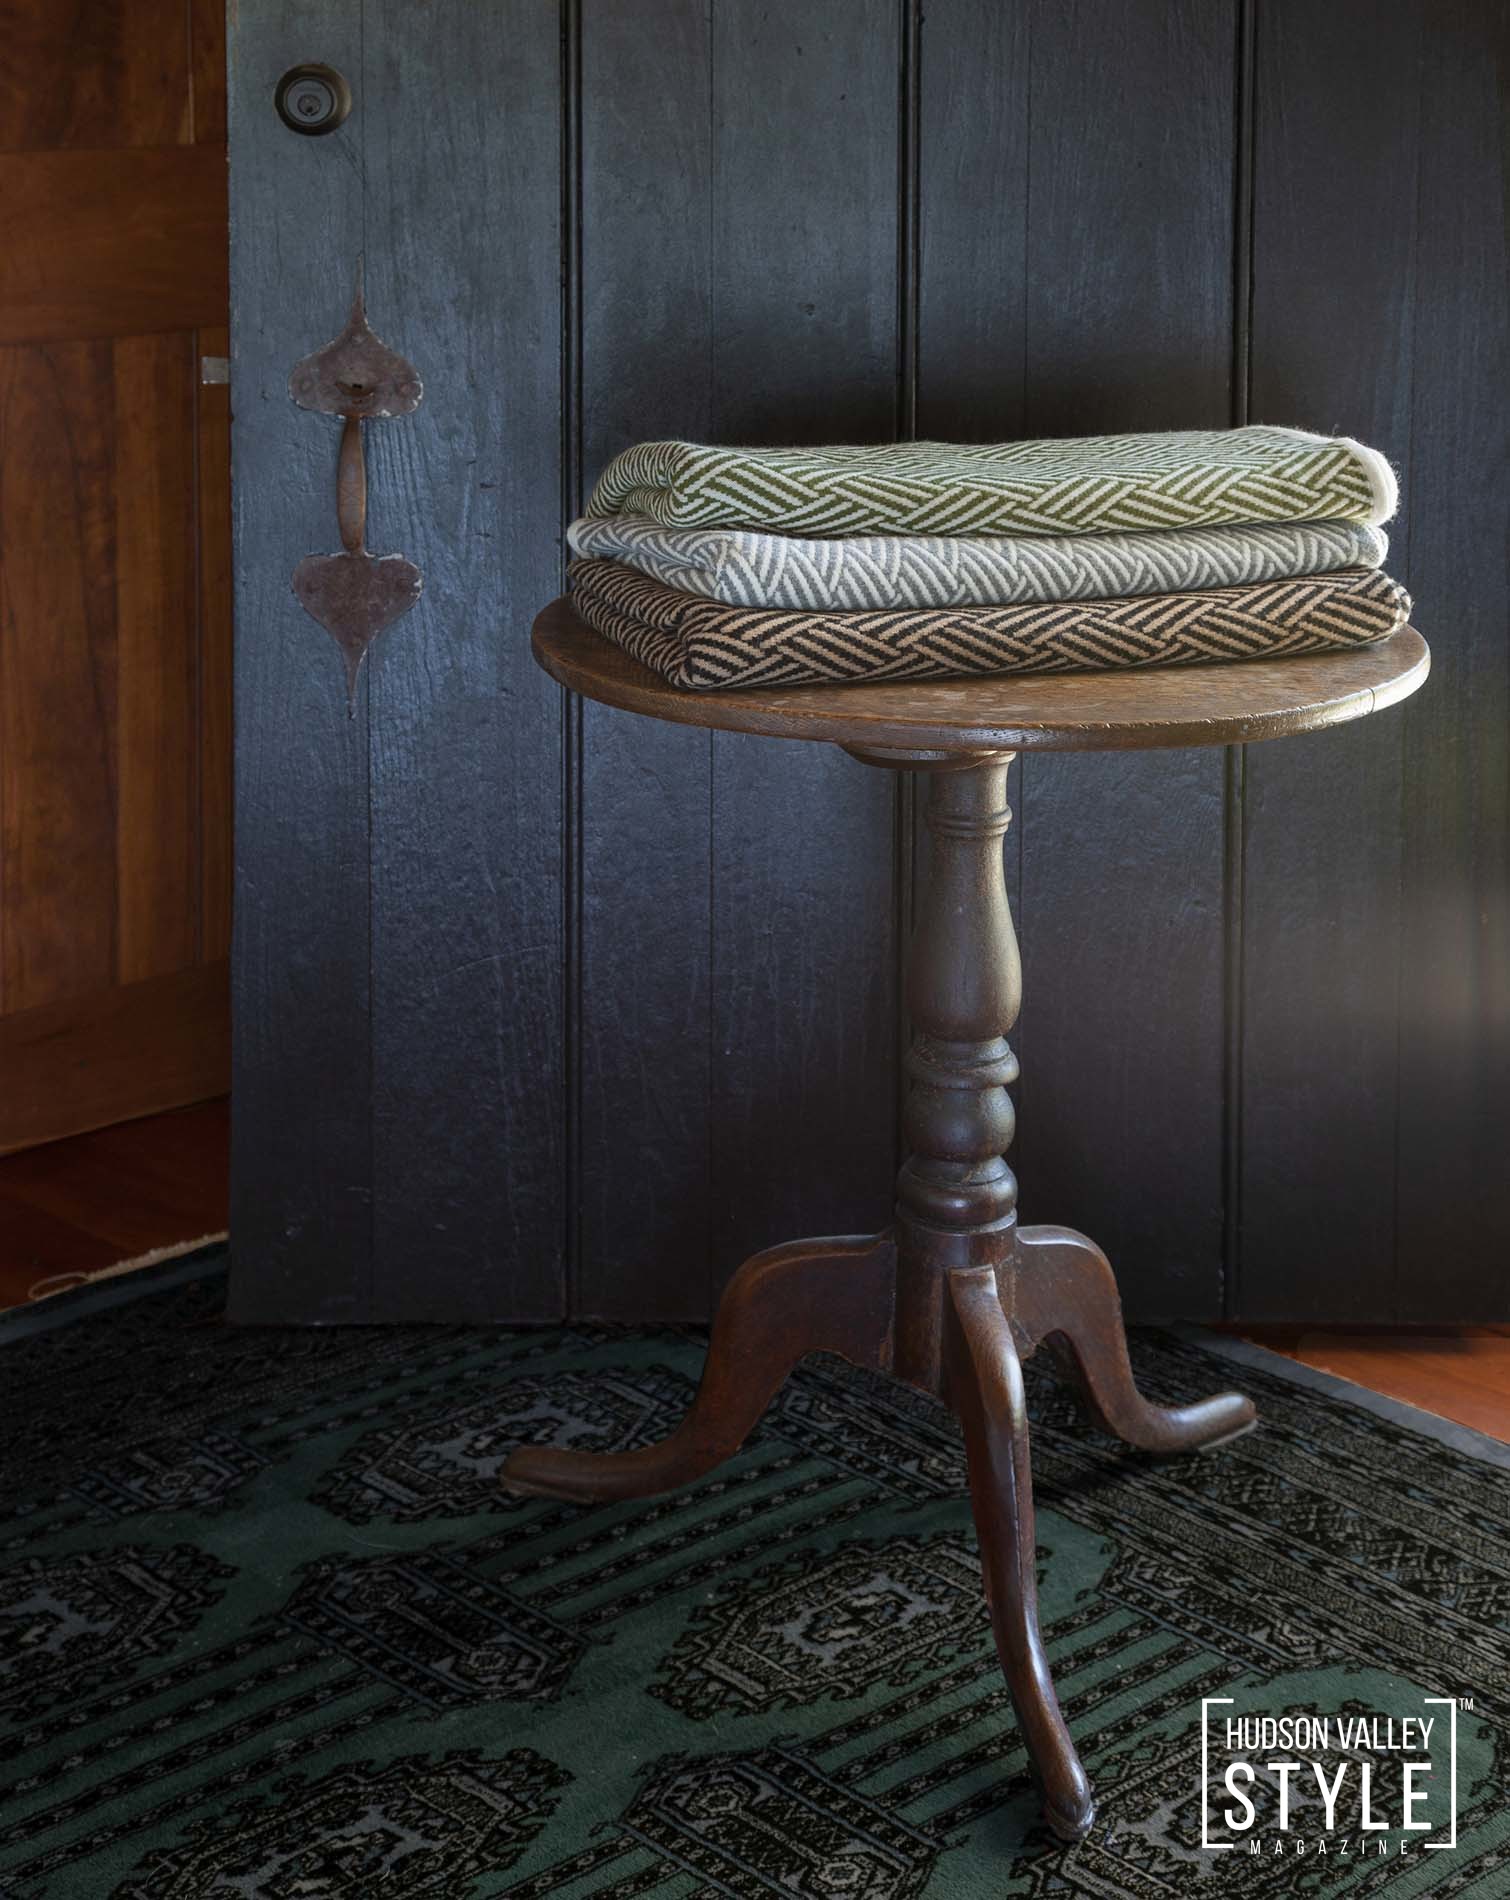 The SAVED collection brings old world traditions into the new with unique designs influenced by Victorian ephemera, French ironwork and early 20th century textiles. Each item is hand-crafted in fine, sustainably sourced Mongolian Yak Down, Cashmere and Camelhair. Designed to be loyal and lasting - A Warm Friend.